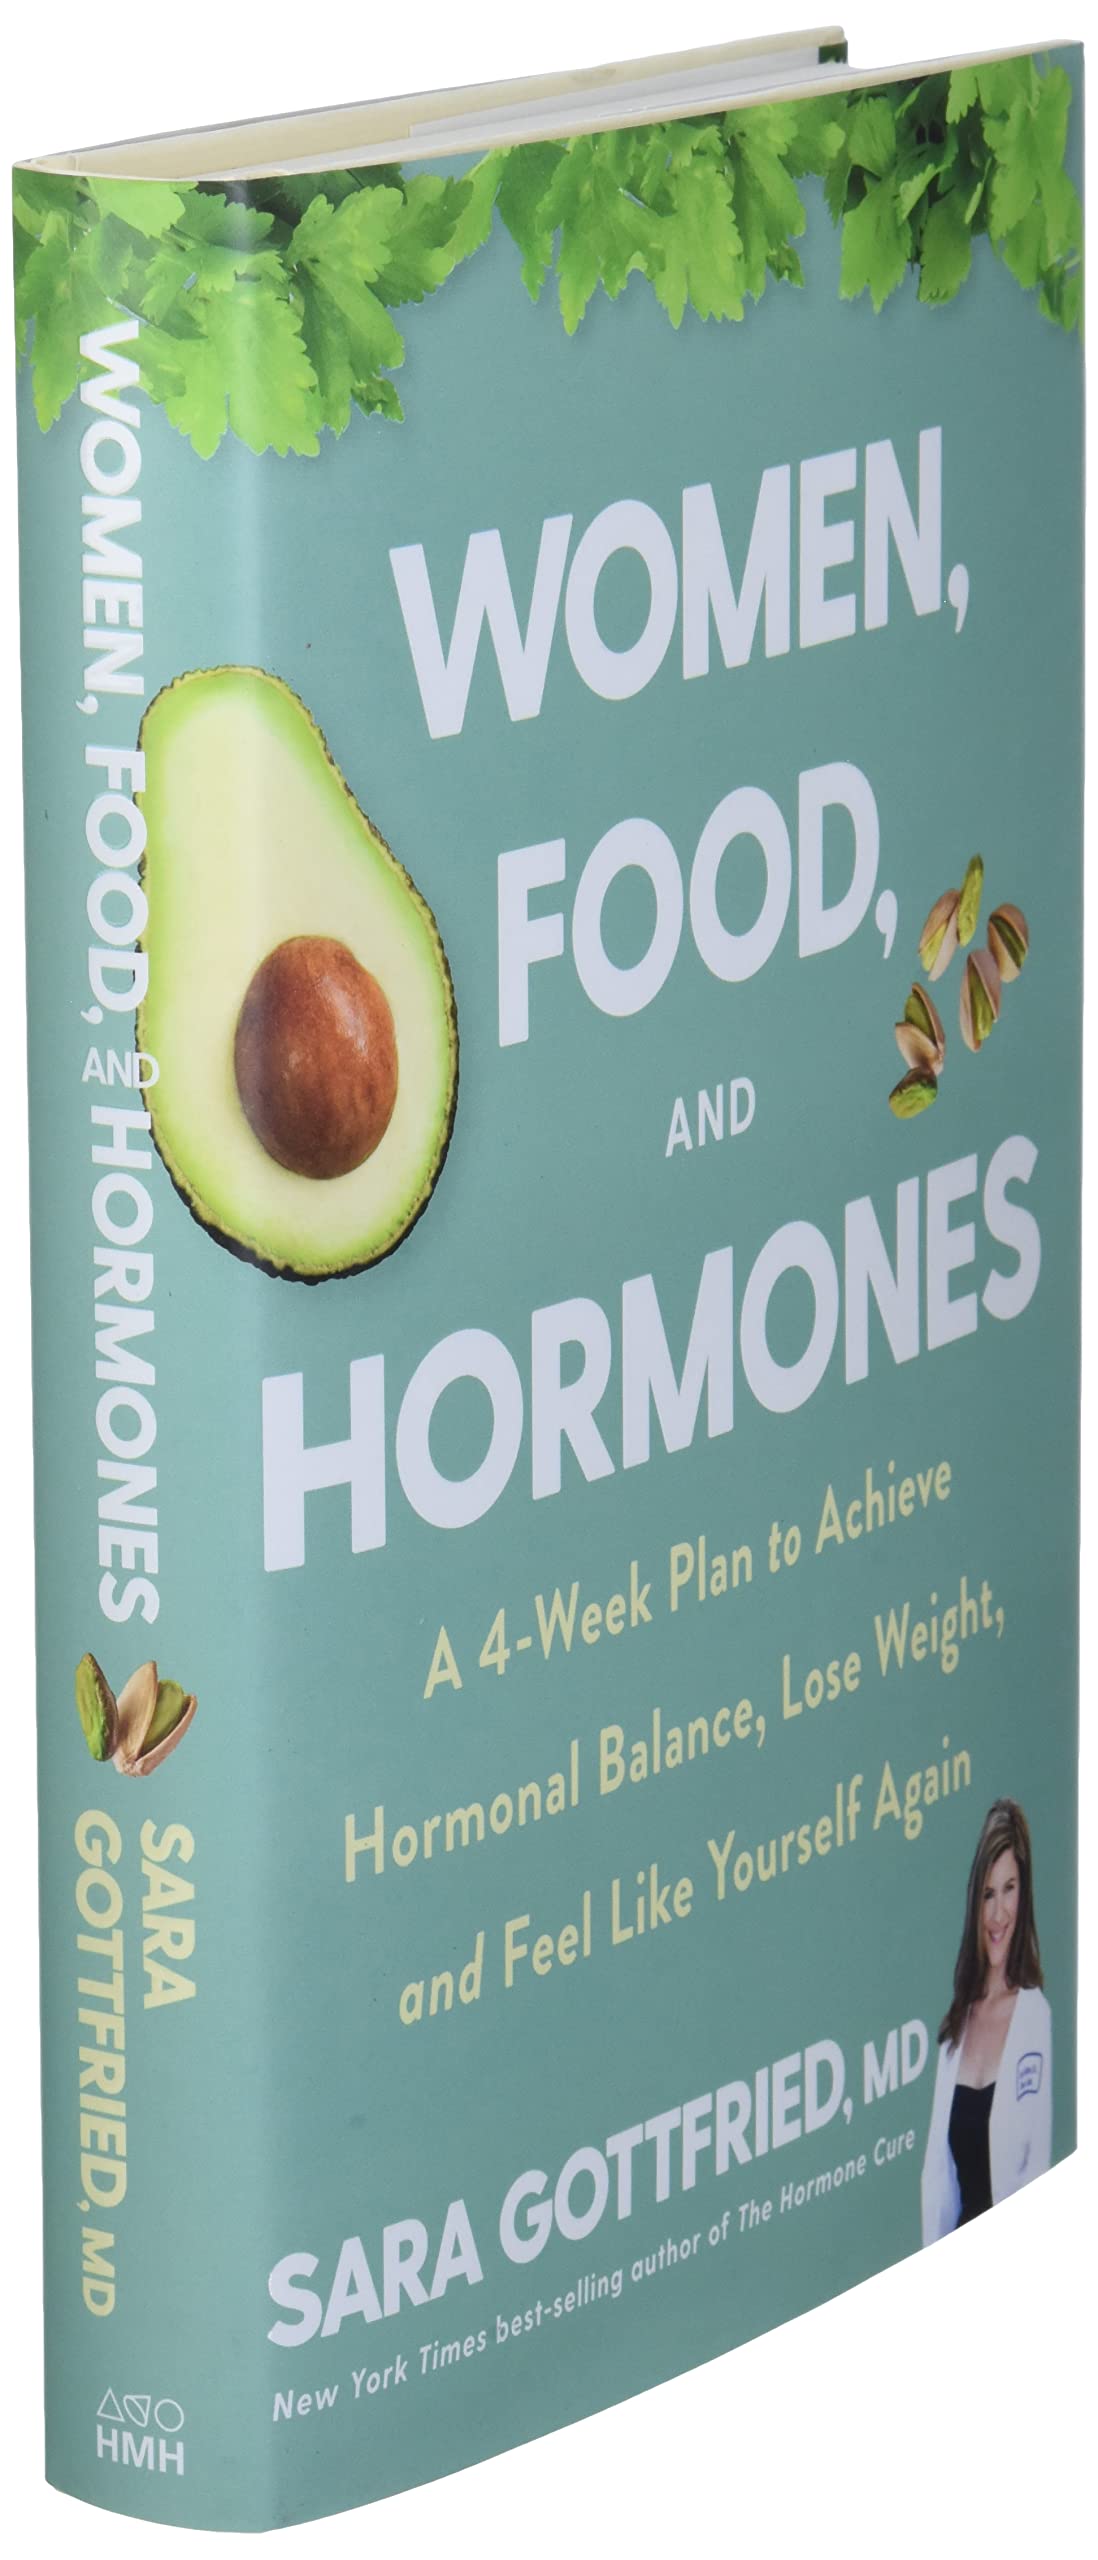 Women Food and Hormones A 4 Week Plan to Achieve Hormonal Balance Lose Weight and Feel Like Yourself Again